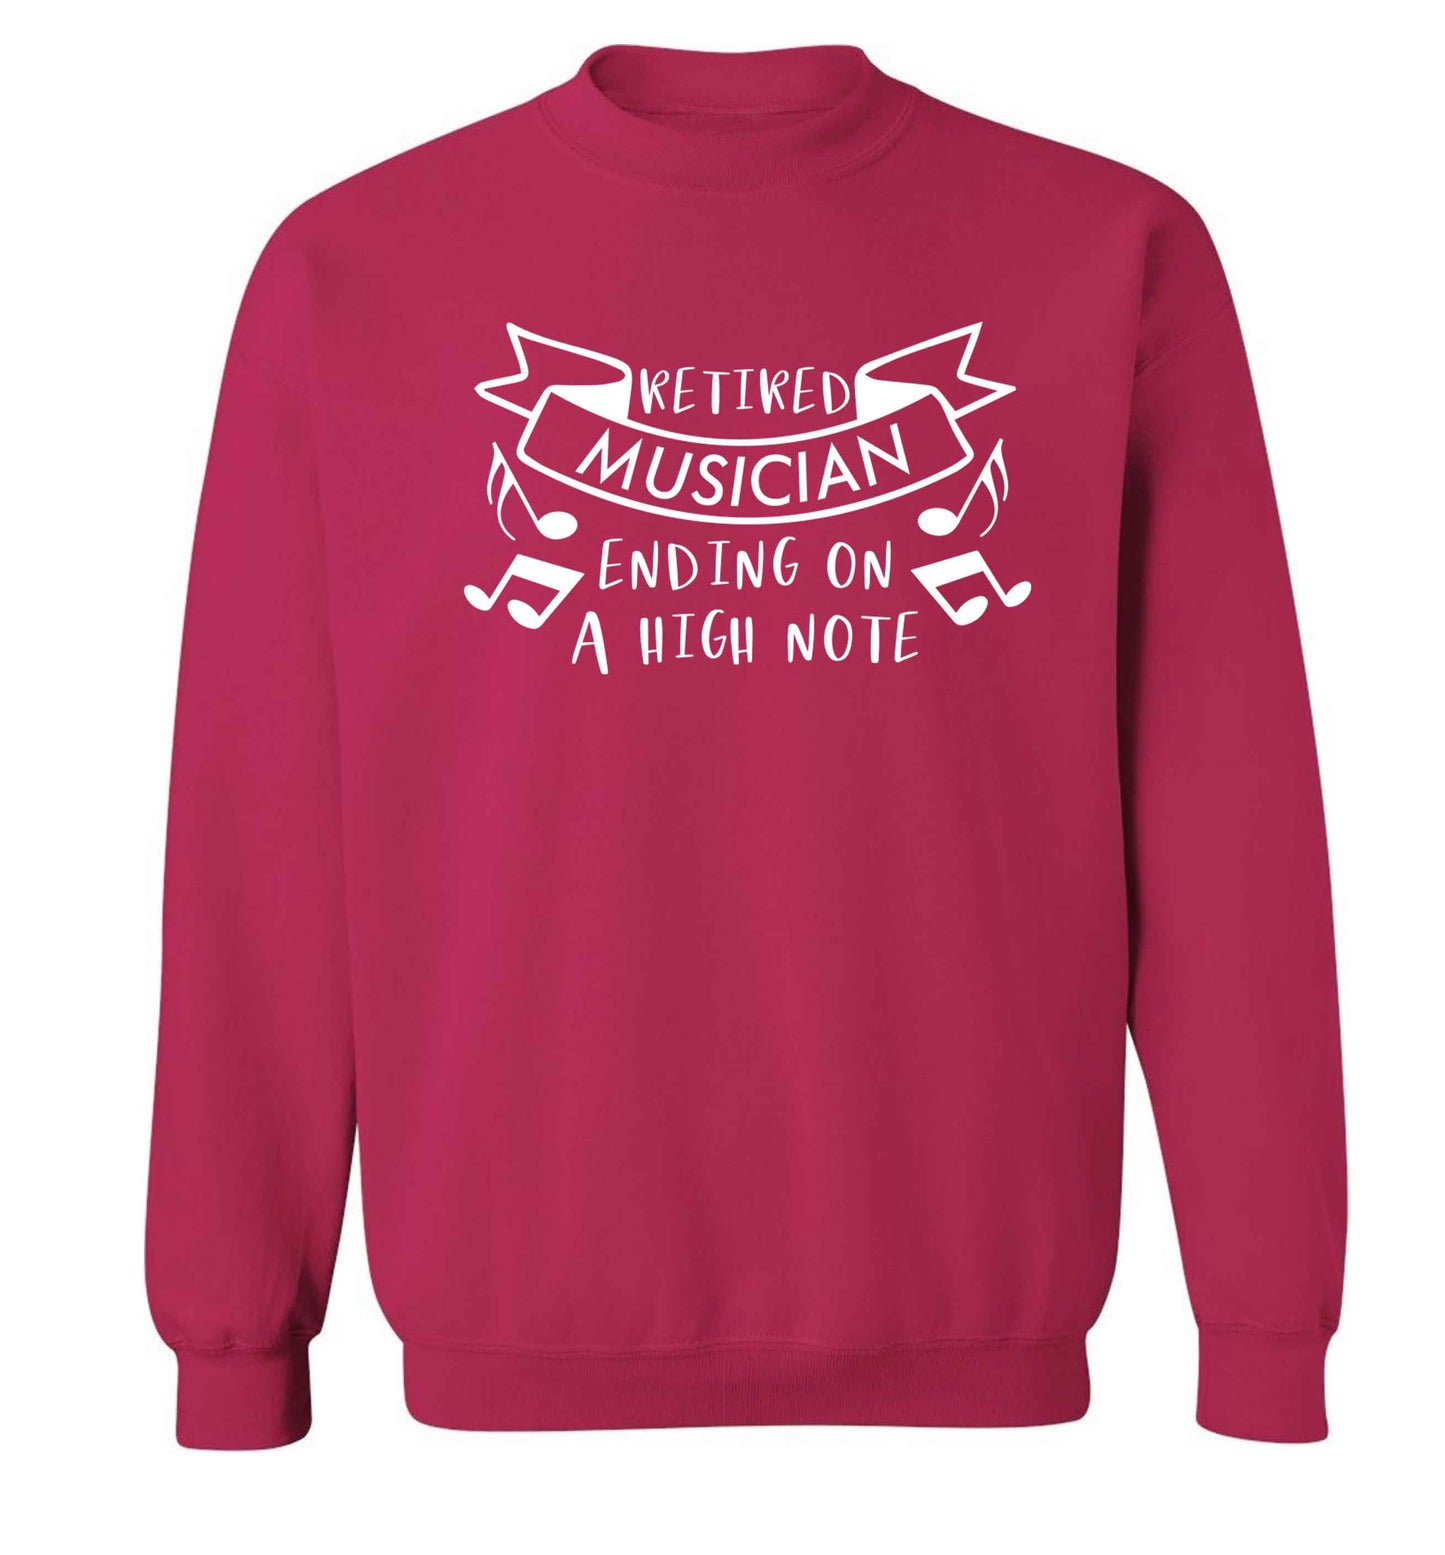 Retired musician ending on a high note Adult's unisex pink Sweater 2XL